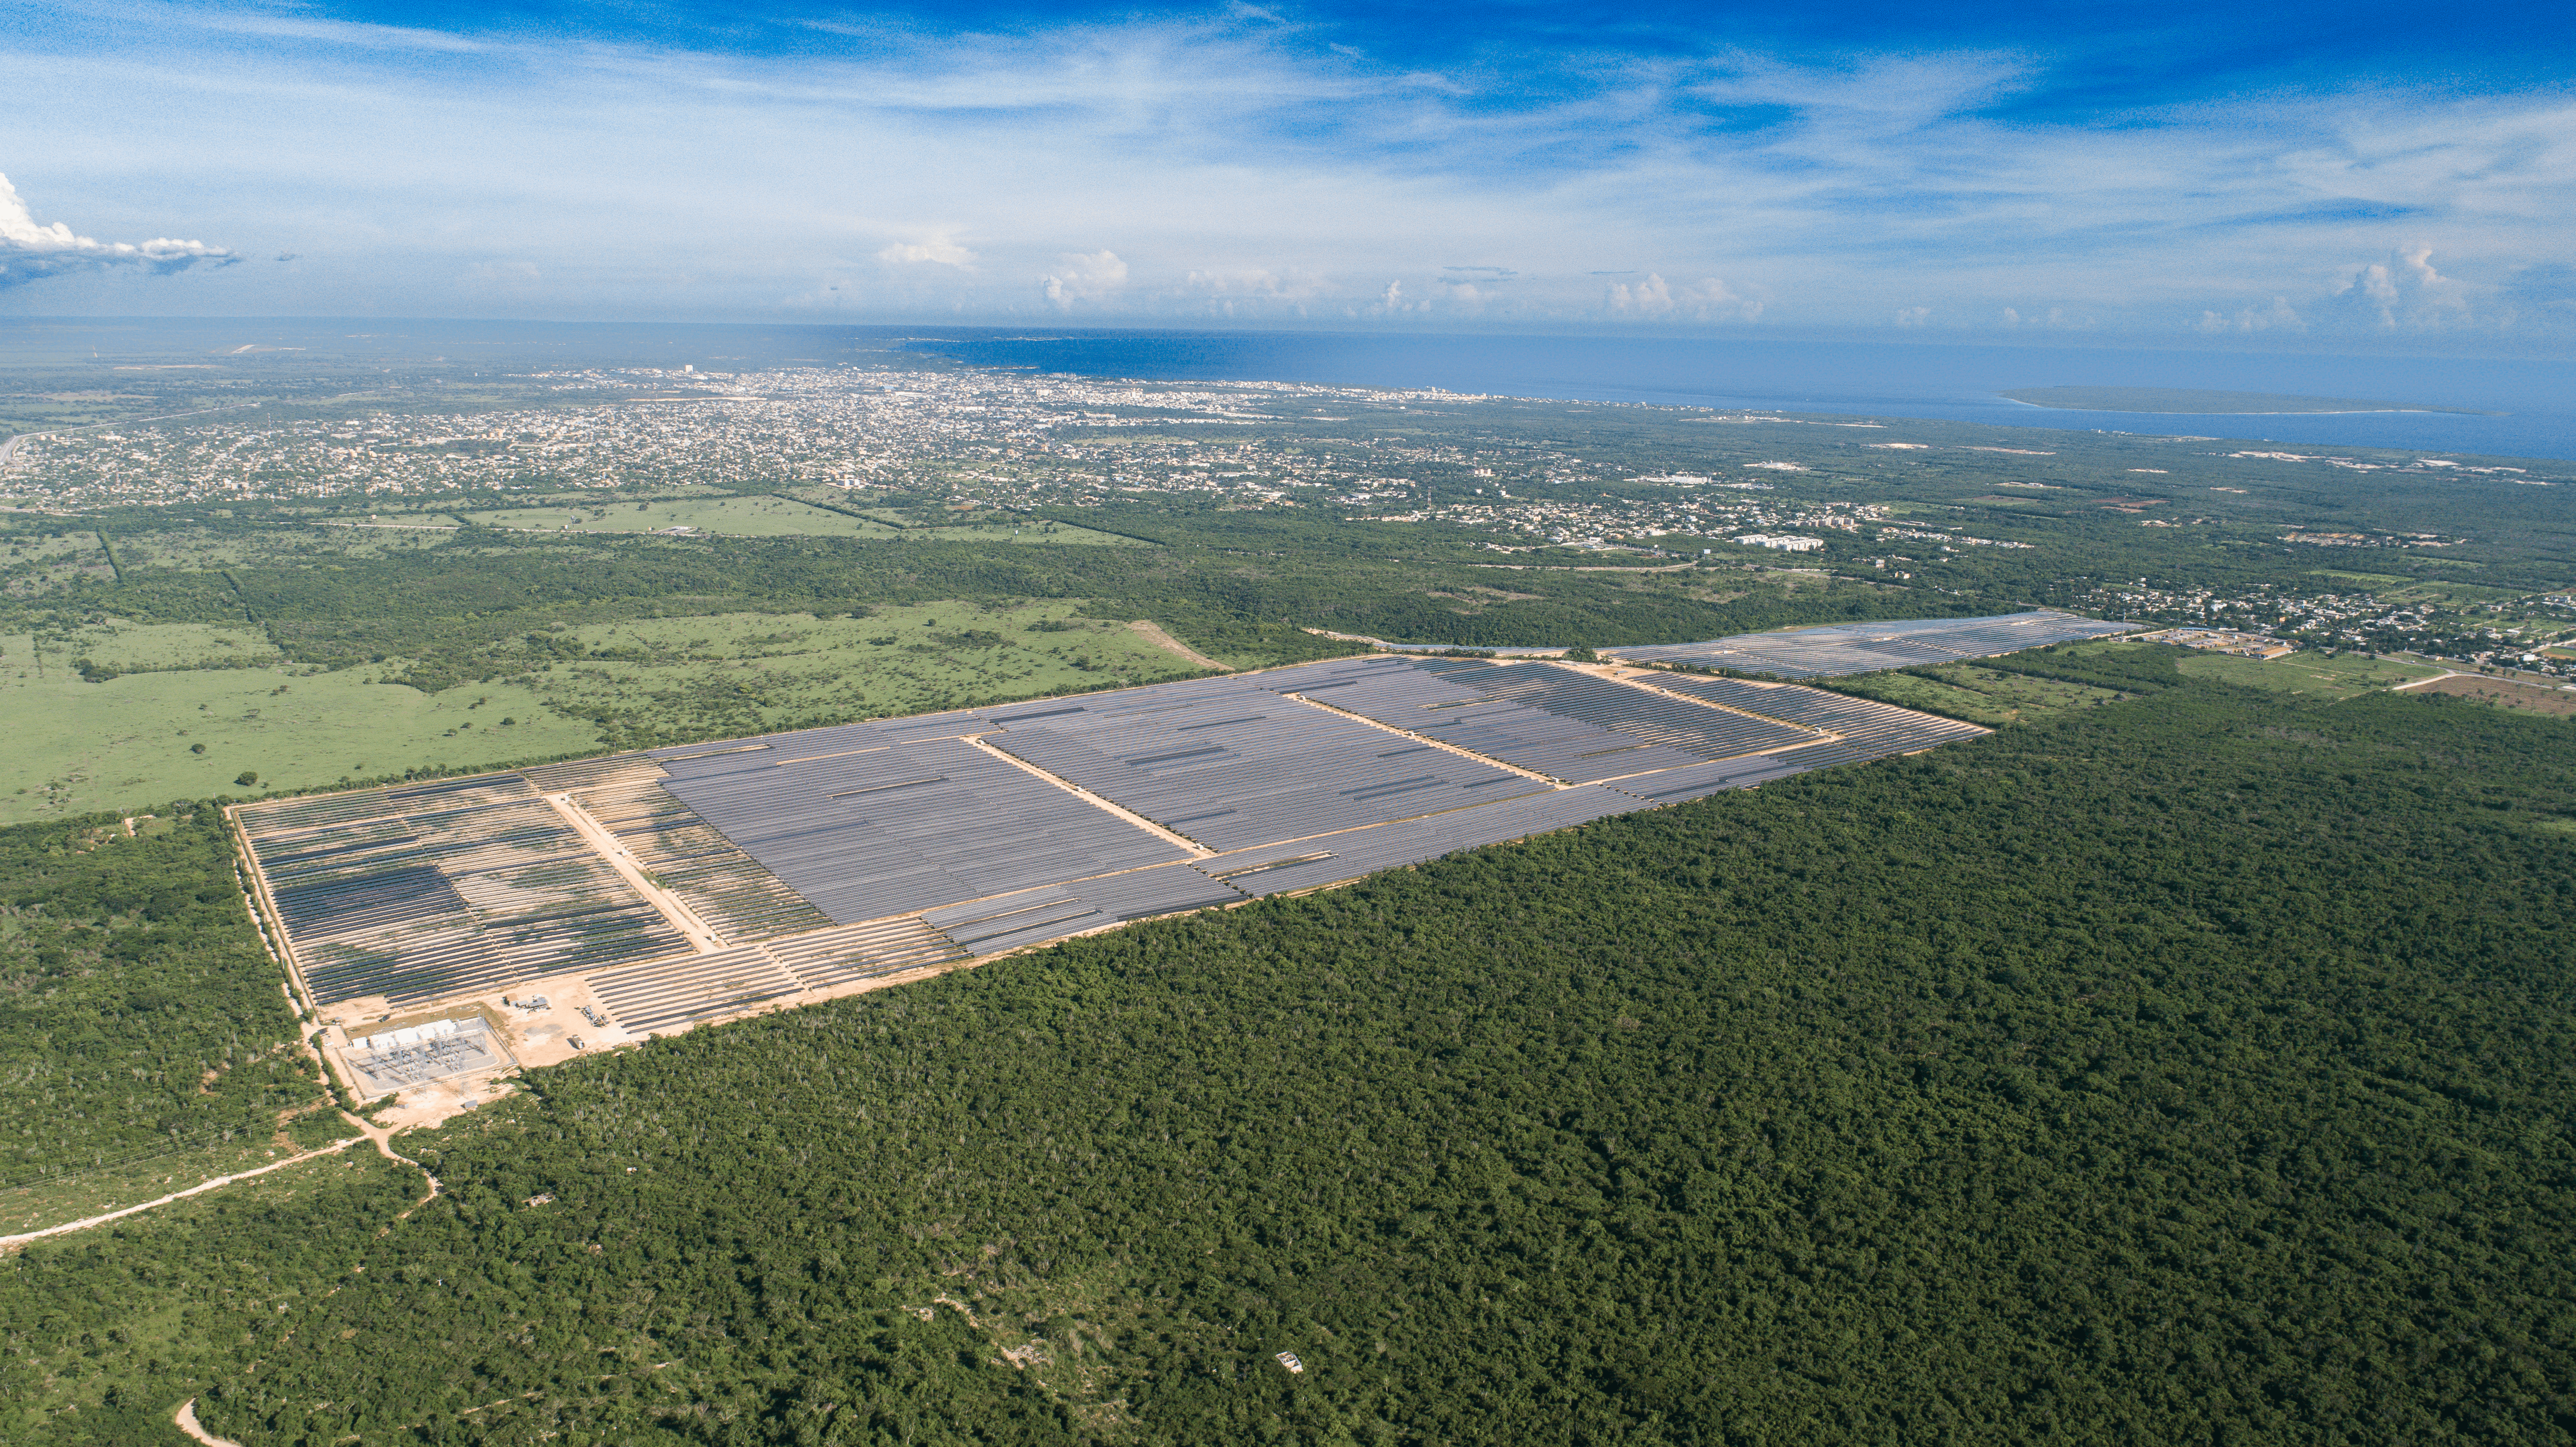 Ecoener to earn more than 250 million dollars with 97 MW in operation in the Dominican Republic